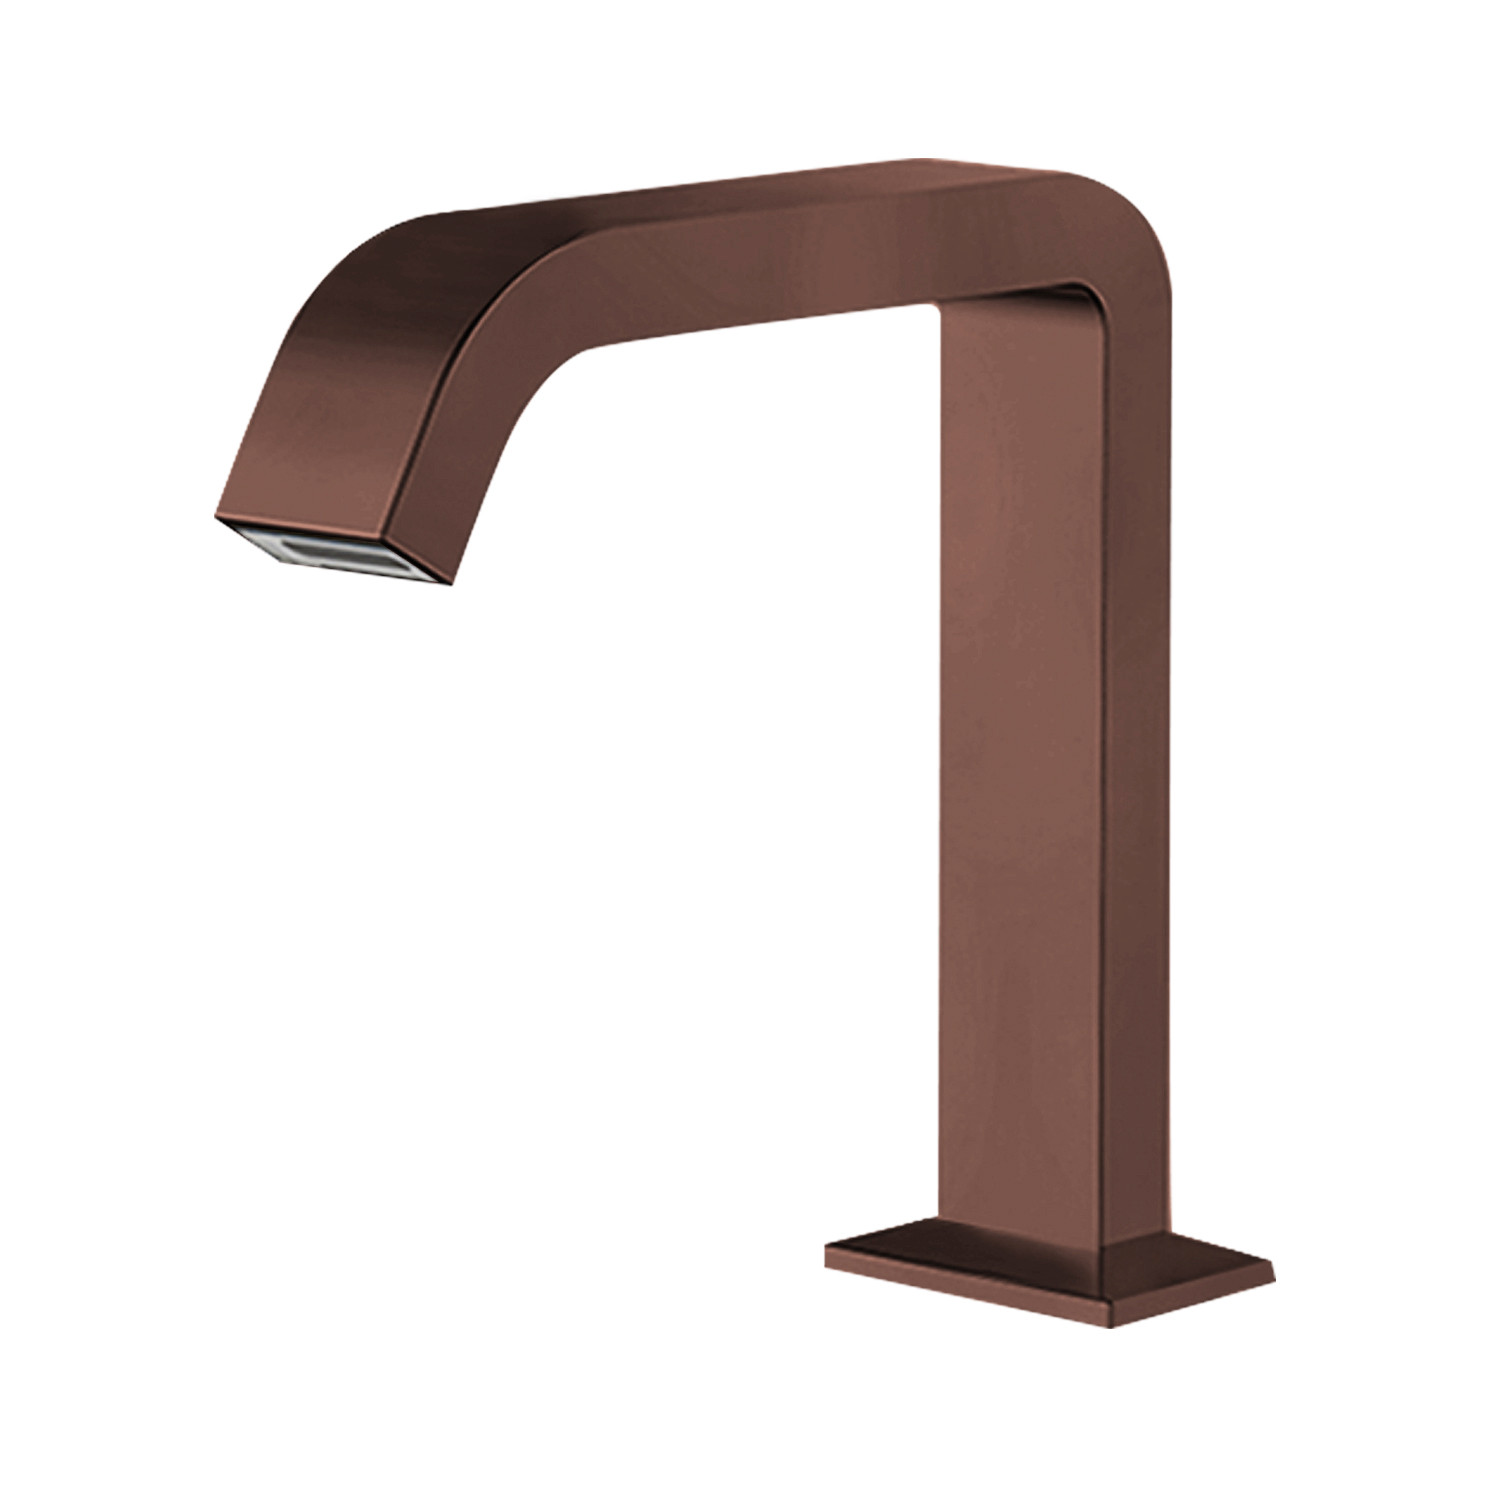 Fontana Commercial Light Oil Rubbed Bronze Touch Less Automatic Sensor Hands Free Faucet